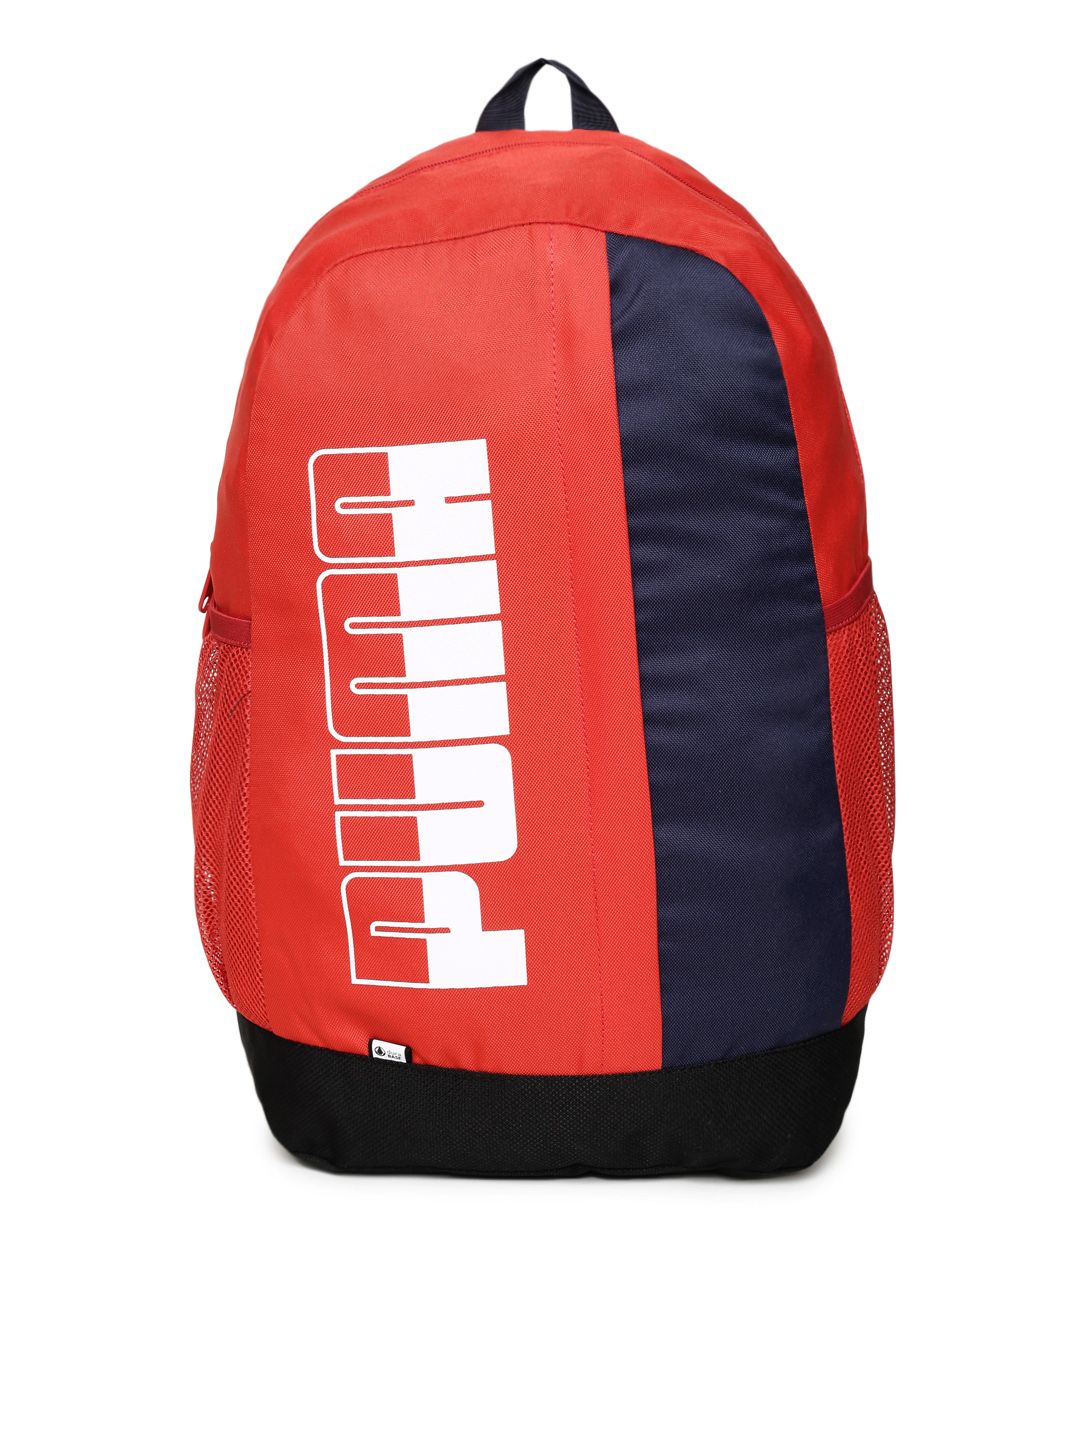 Puma Unisex Red & Black Brand Logo Backpack Price in India